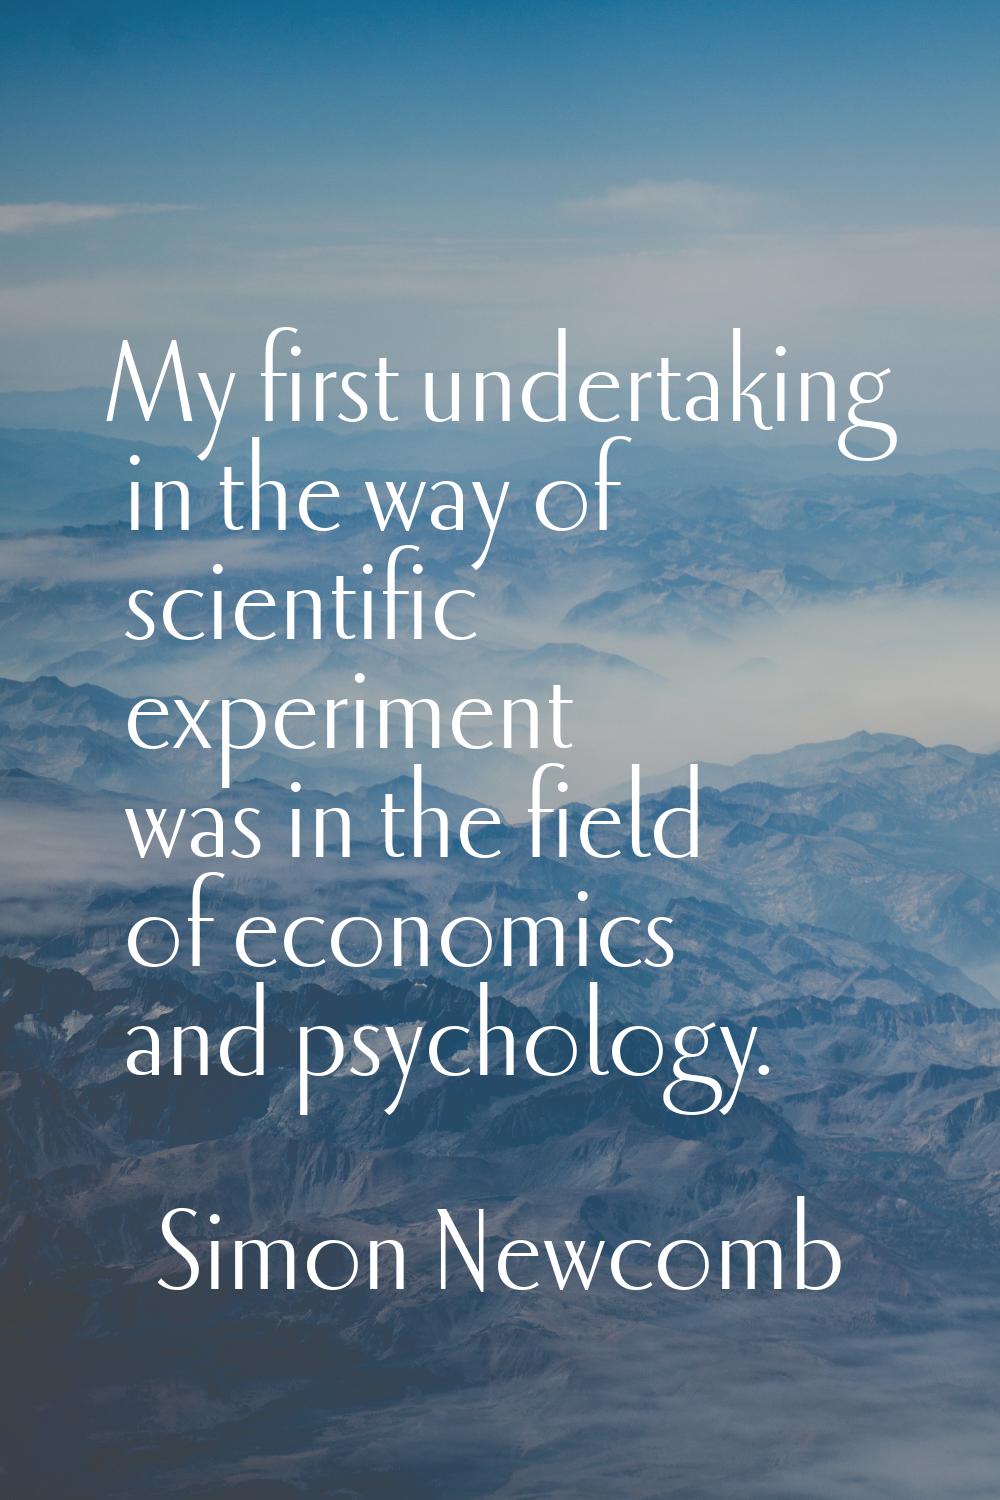 My first undertaking in the way of scientific experiment was in the field of economics and psycholo